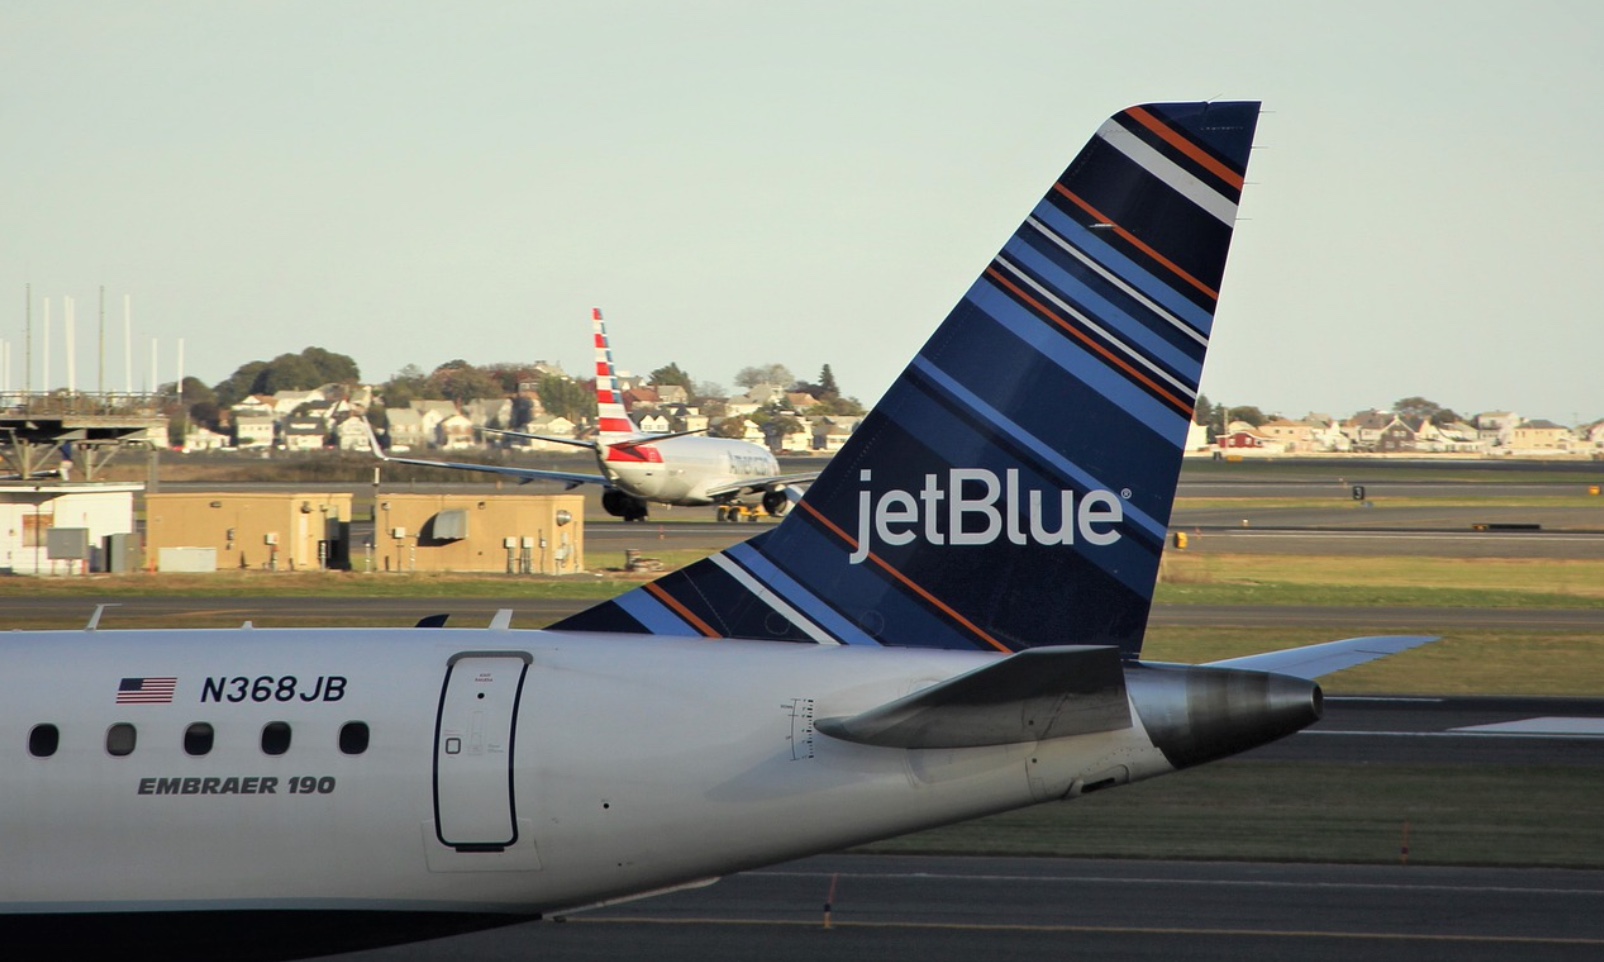 JetBlue sets big goals for emissions, recycling and sustainable fuel consumption in the air - environment + energy leader